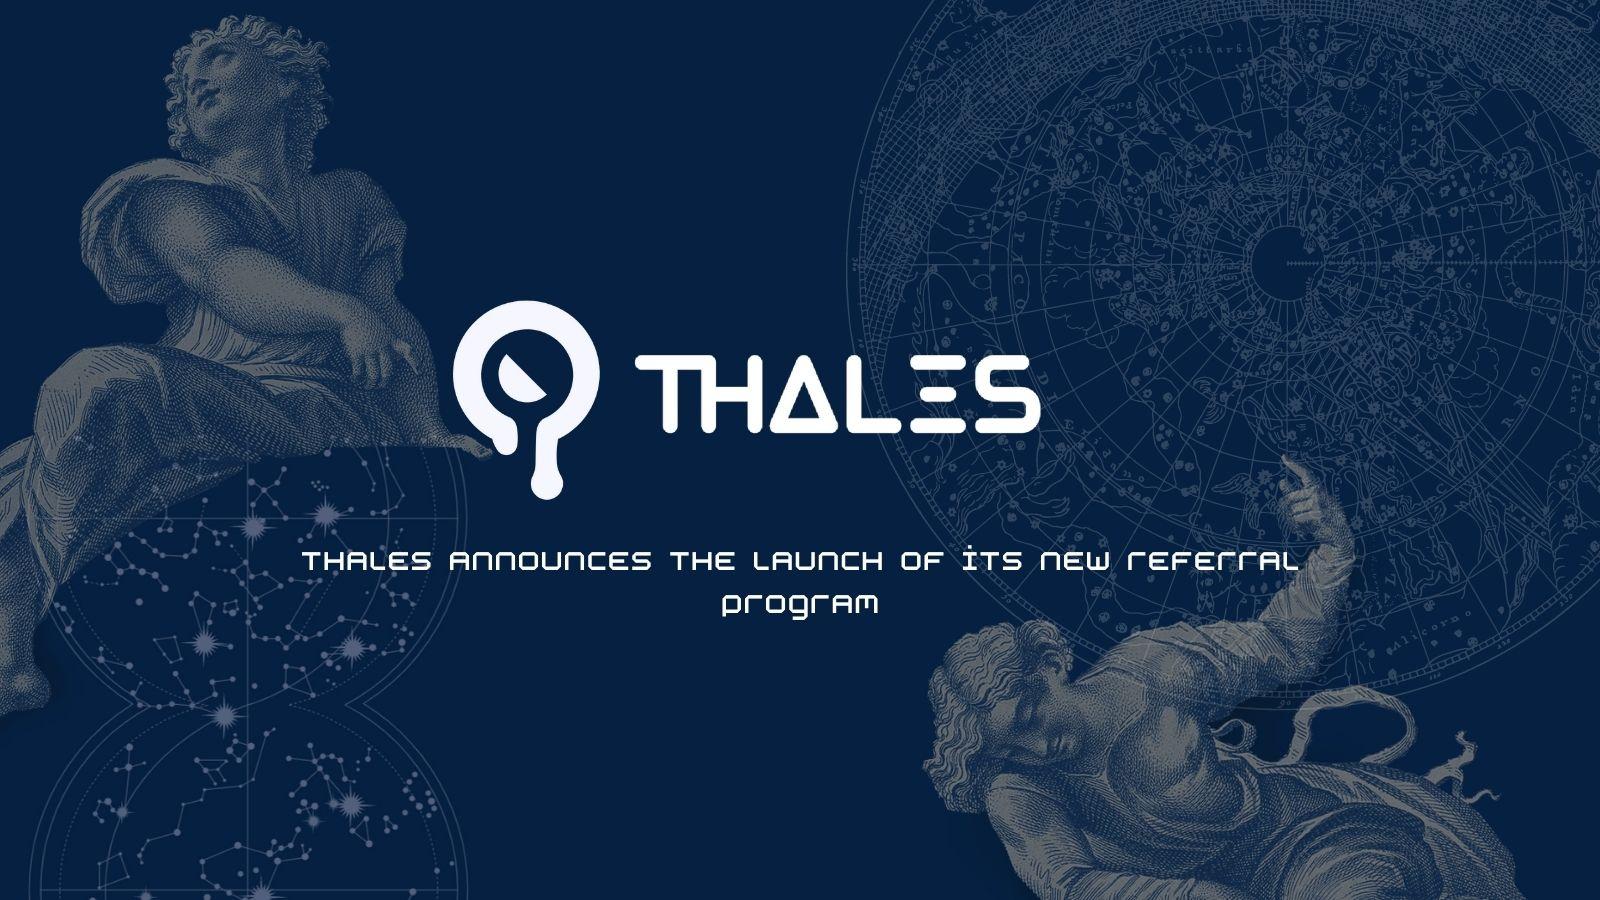 Thales Announces the Launch of Its New Referral Program 13